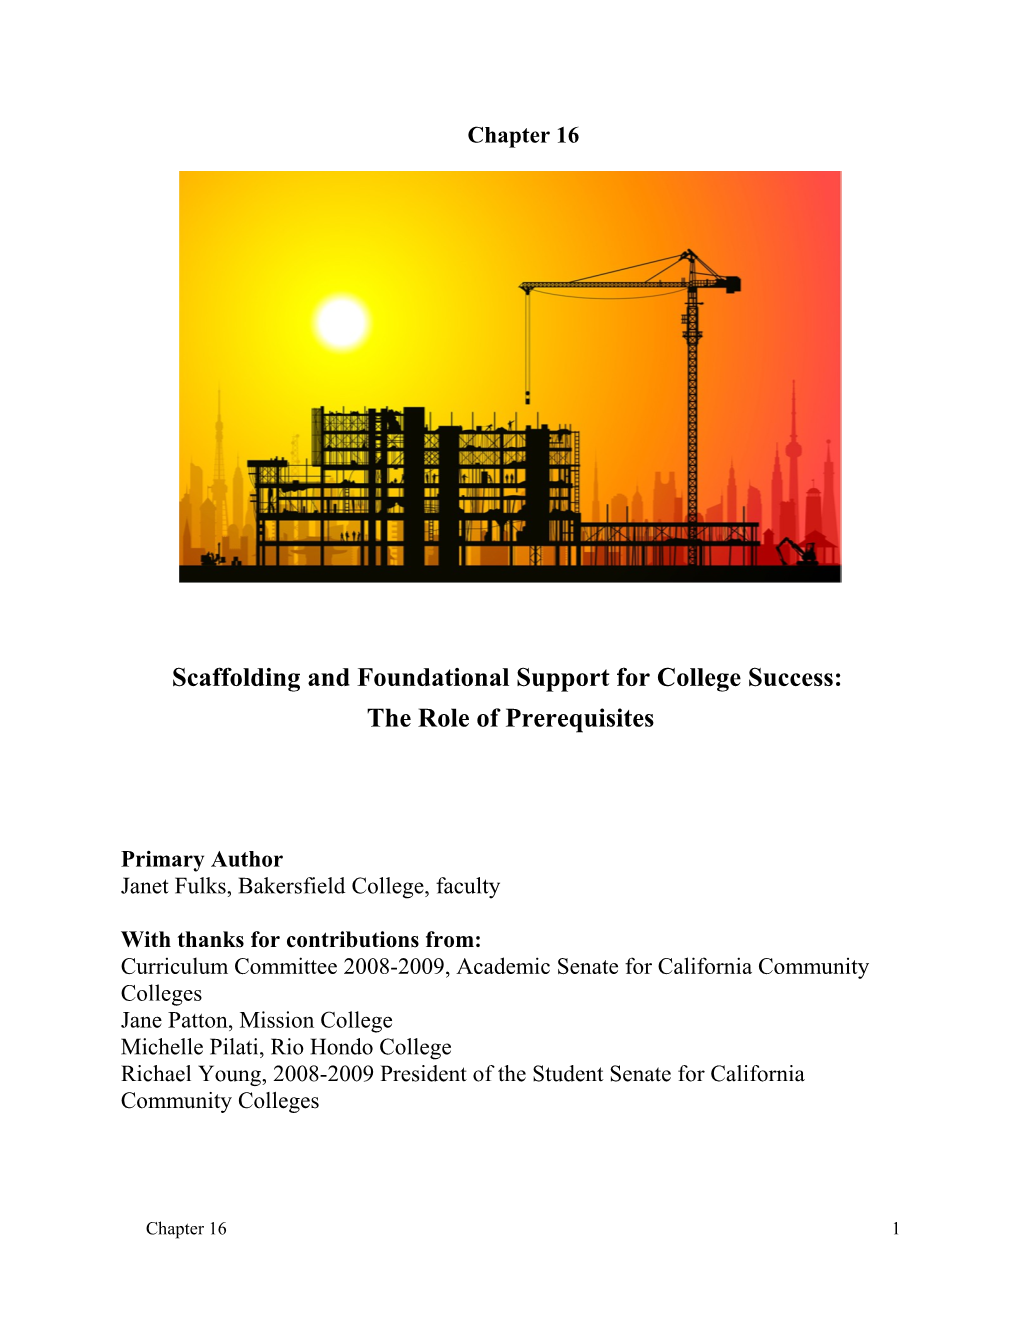 Scaffolding and Foundational Support for College Success